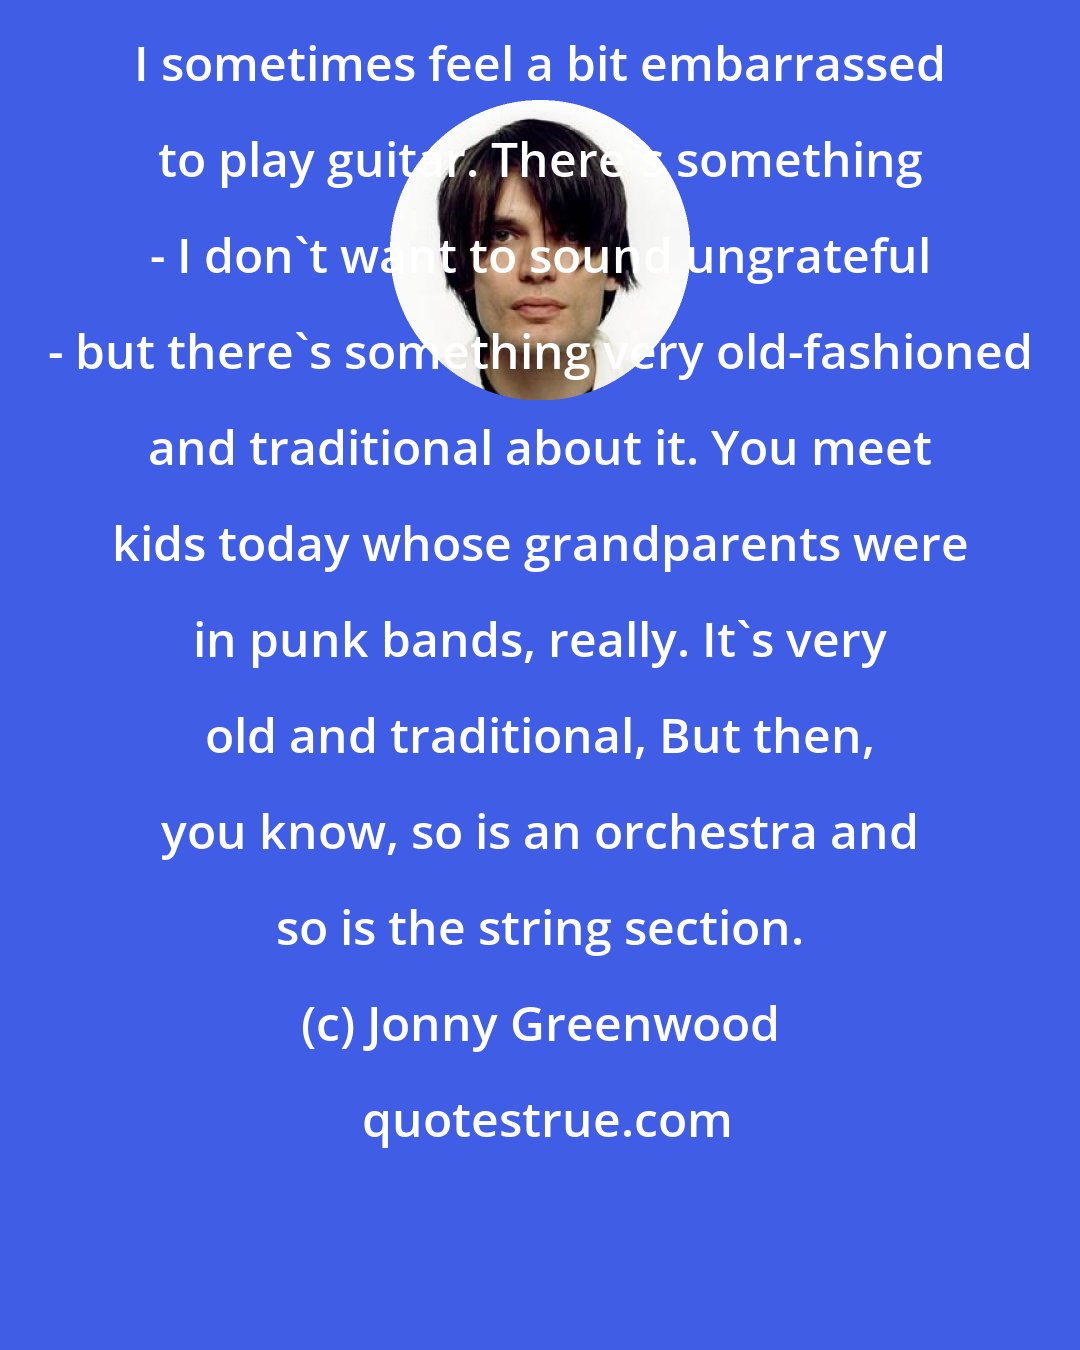 Jonny Greenwood: I sometimes feel a bit embarrassed to play guitar. There's something - I don't want to sound ungrateful - but there's something very old-fashioned and traditional about it. You meet kids today whose grandparents were in punk bands, really. It's very old and traditional, But then, you know, so is an orchestra and so is the string section.